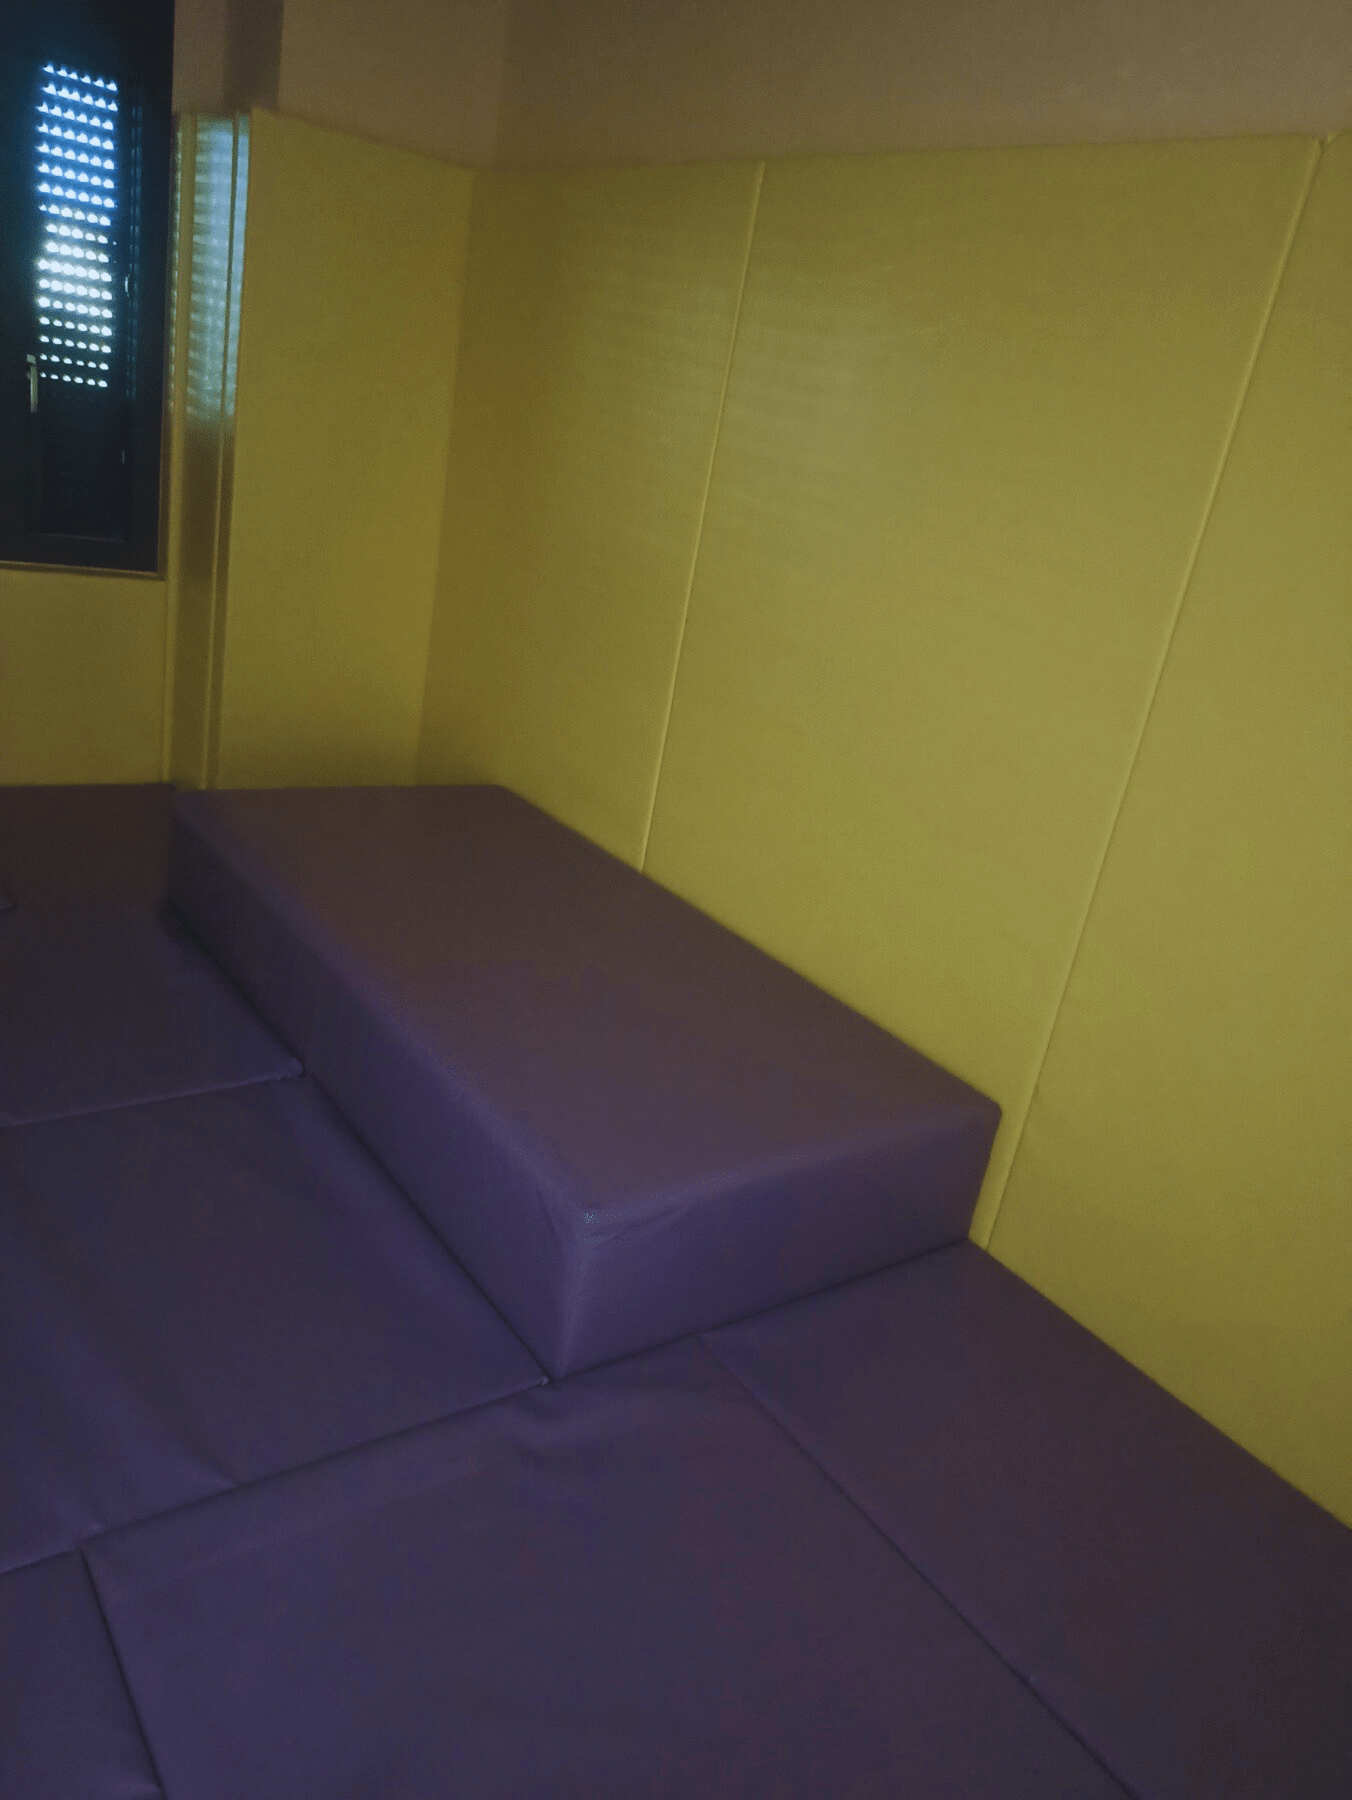 Floor & Wall Padding for creation of "Soft Room"